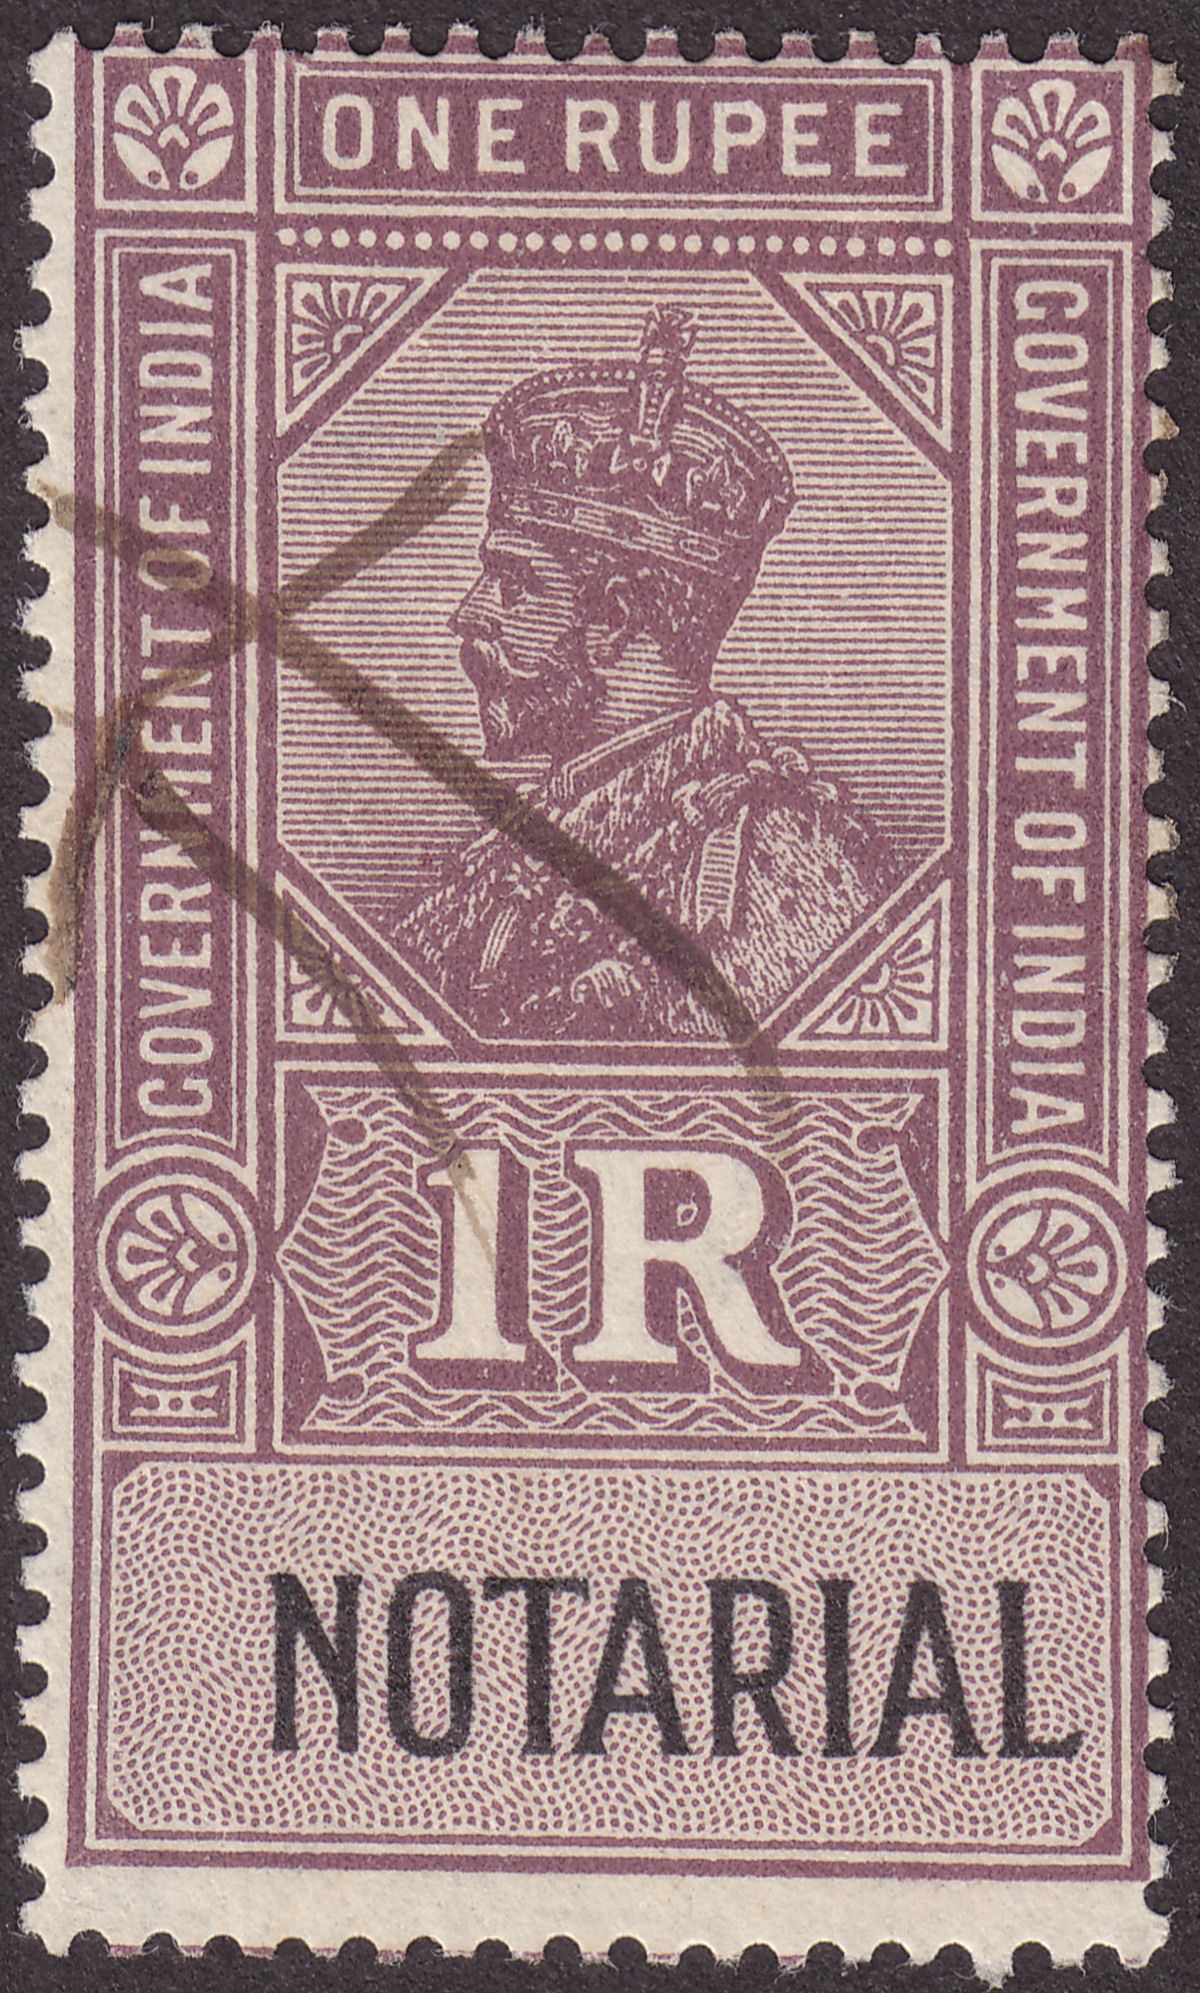 India 1925 KGV Revenue Notarial 1r Purple and Black Used BF40